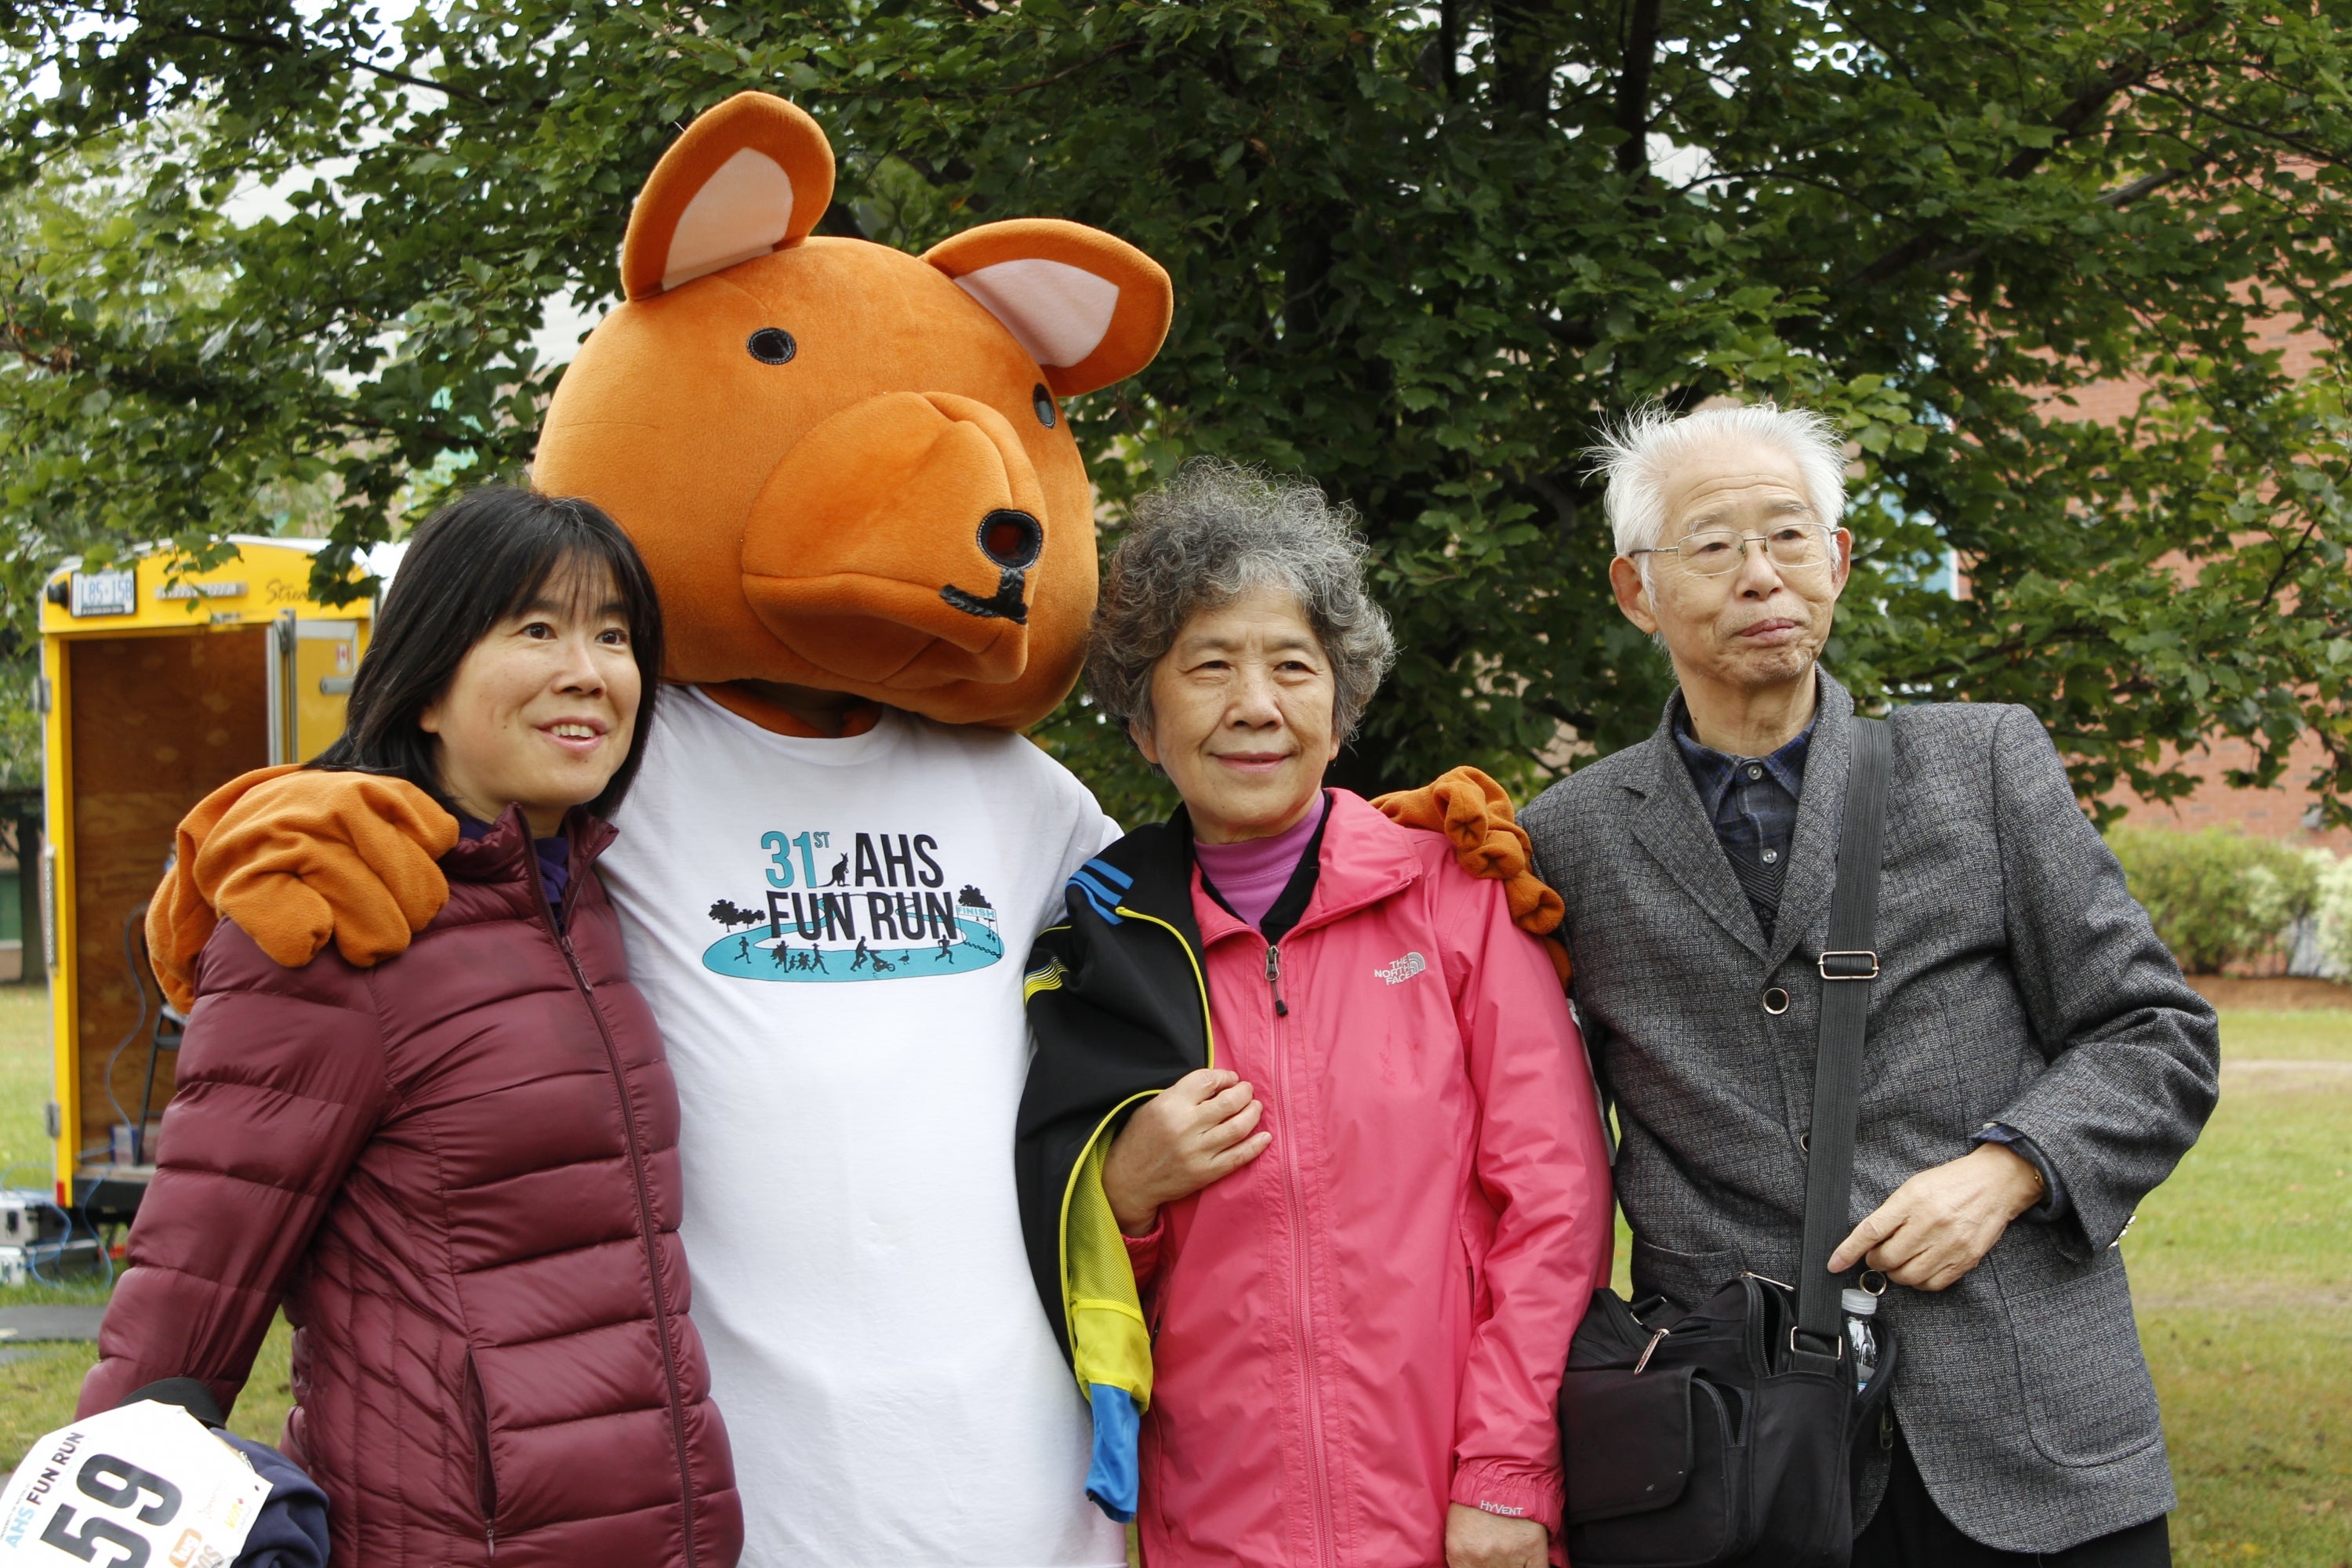 A family standing with AHSSIE the mascot